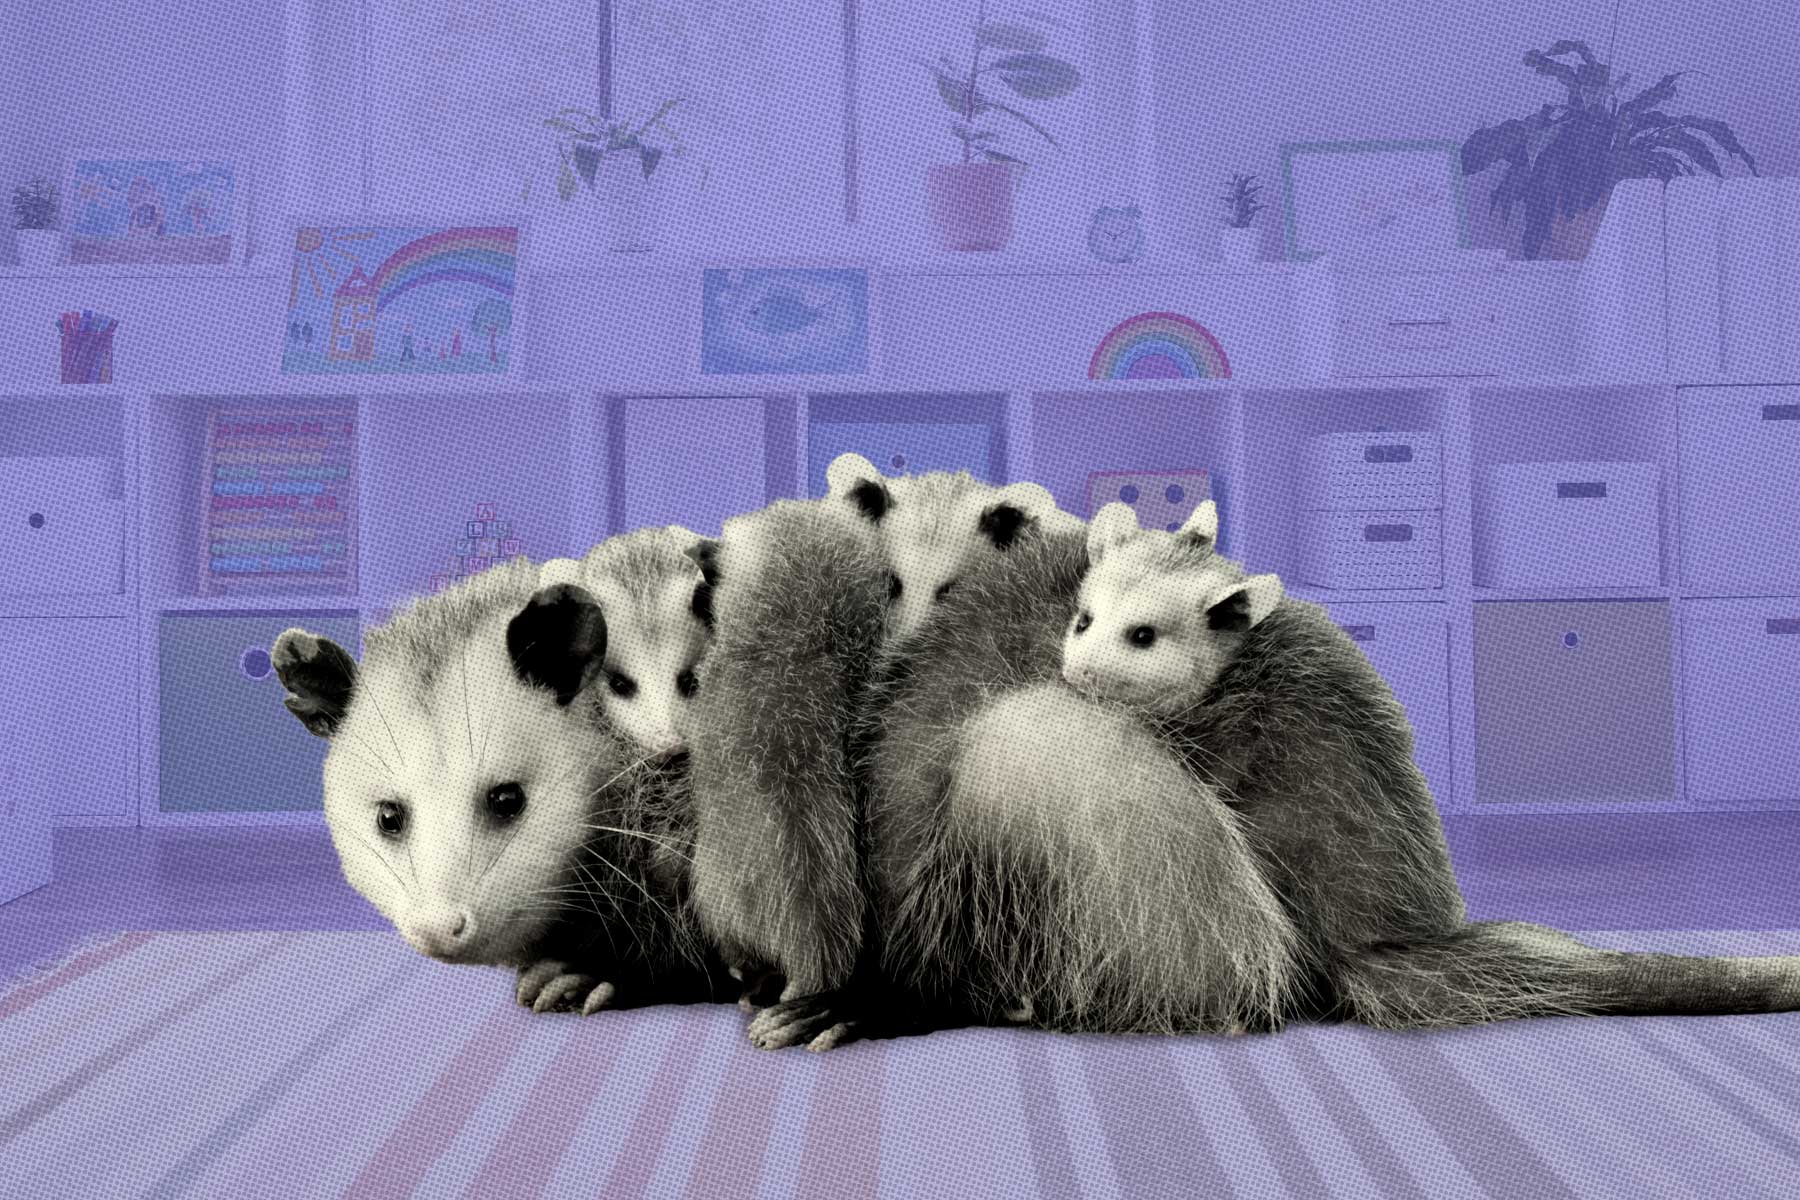 A black-and-white photo of an opossum mother with several babies clinging to her against a purple-tinted nursery photo.